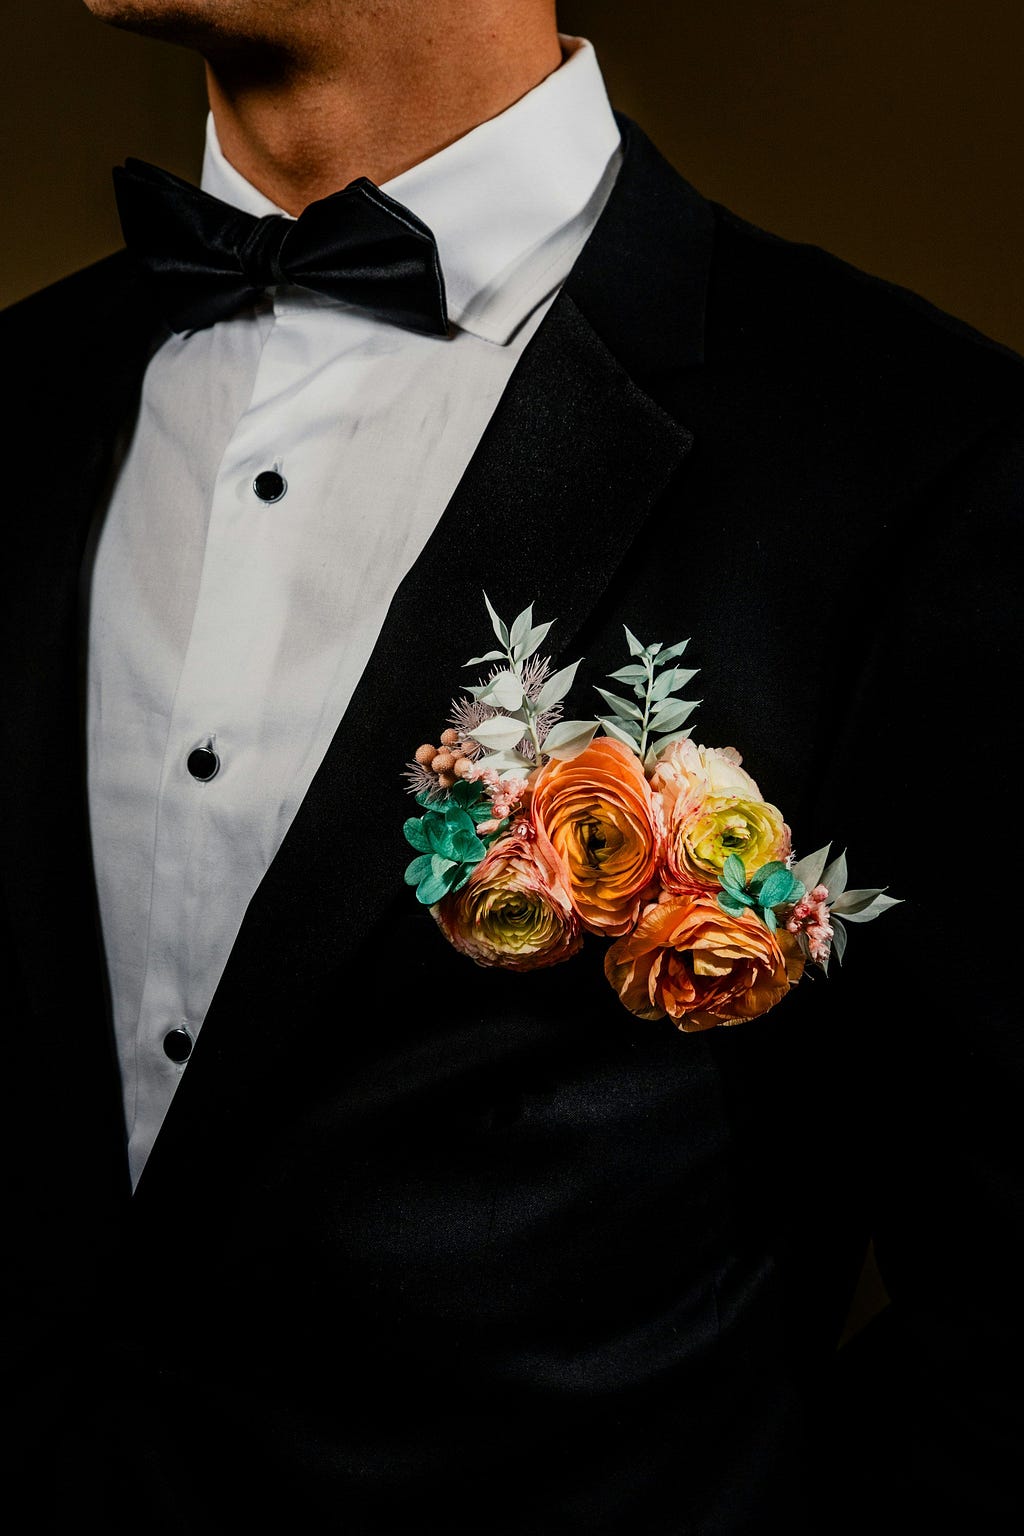 A formal black tuxedo with a white shirt and black bow tie, adorned with a colorful boutonniere featuring orange and peach flowers, against an indistinct background.